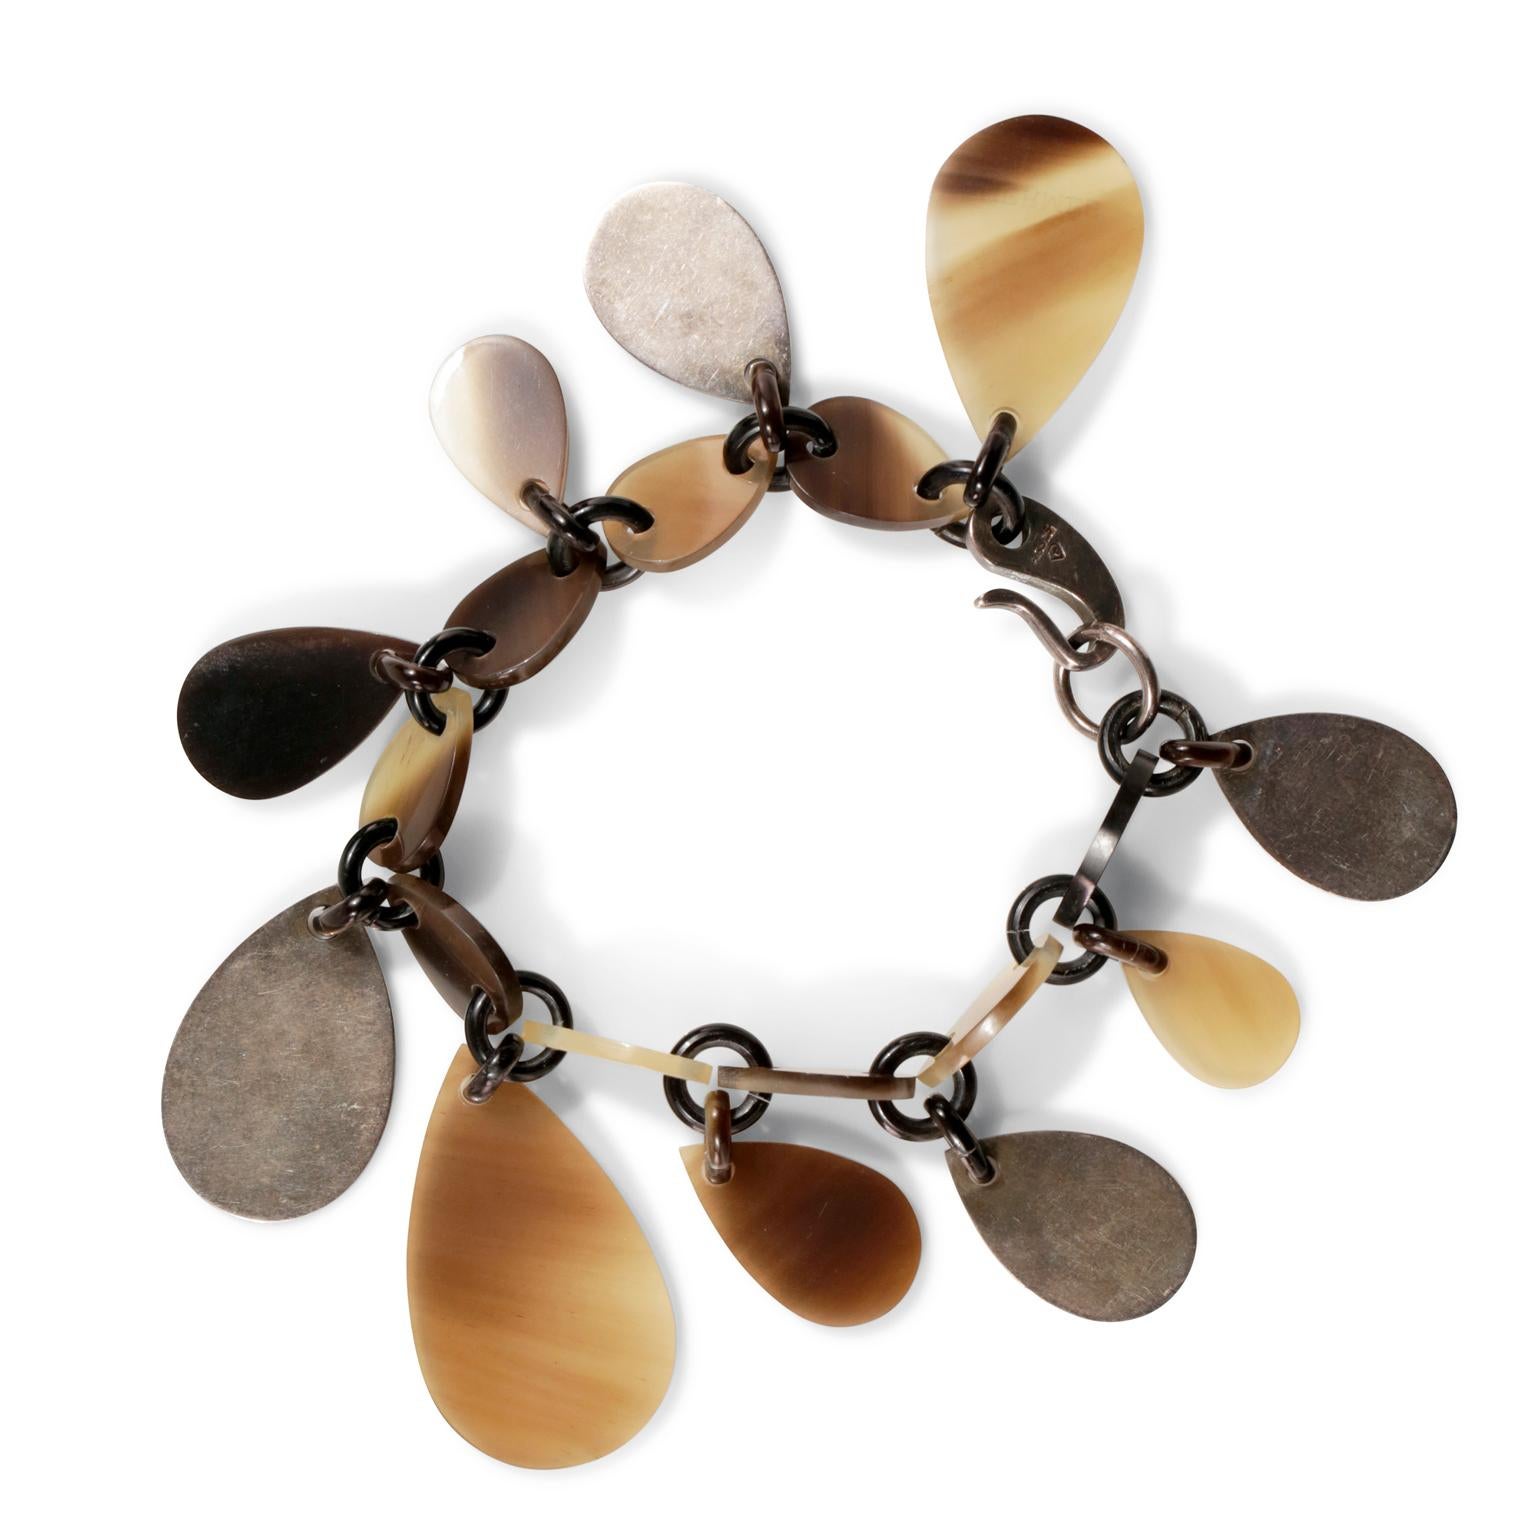 This authentic Hermès Raji Horn Bracelet is in excellent condition.  Neutral colored lacquered buffalo horn teardrop shaped charms dangle all the way around this natural bracelet.  Sterling silver hooked clasp. Box or pouch included.